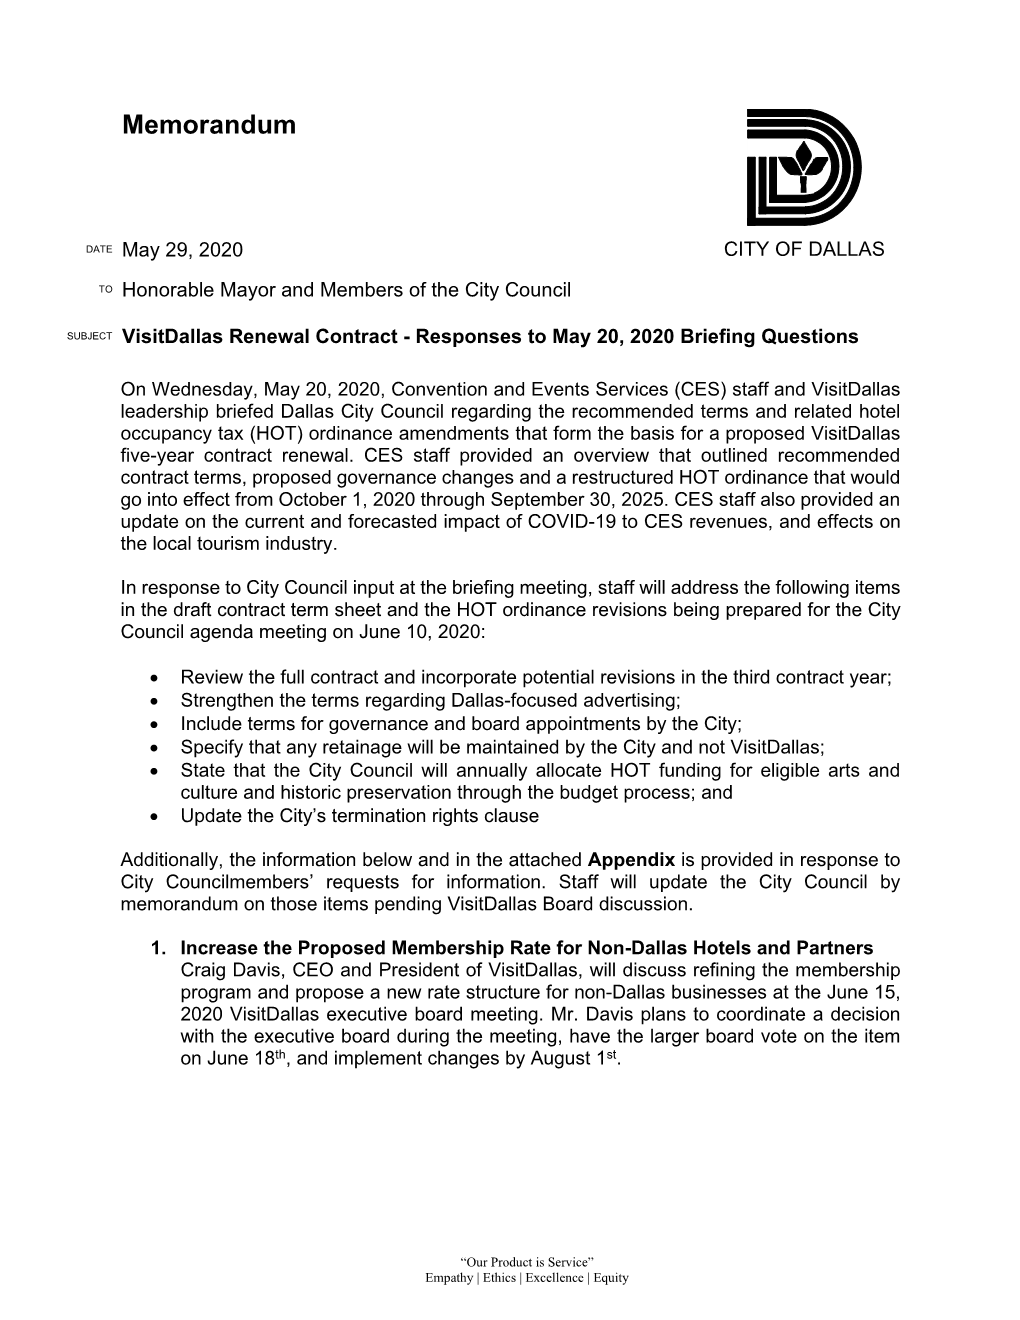 Visitdallas Renewal Contract - Responses to May 20, 2020 Briefing Questions